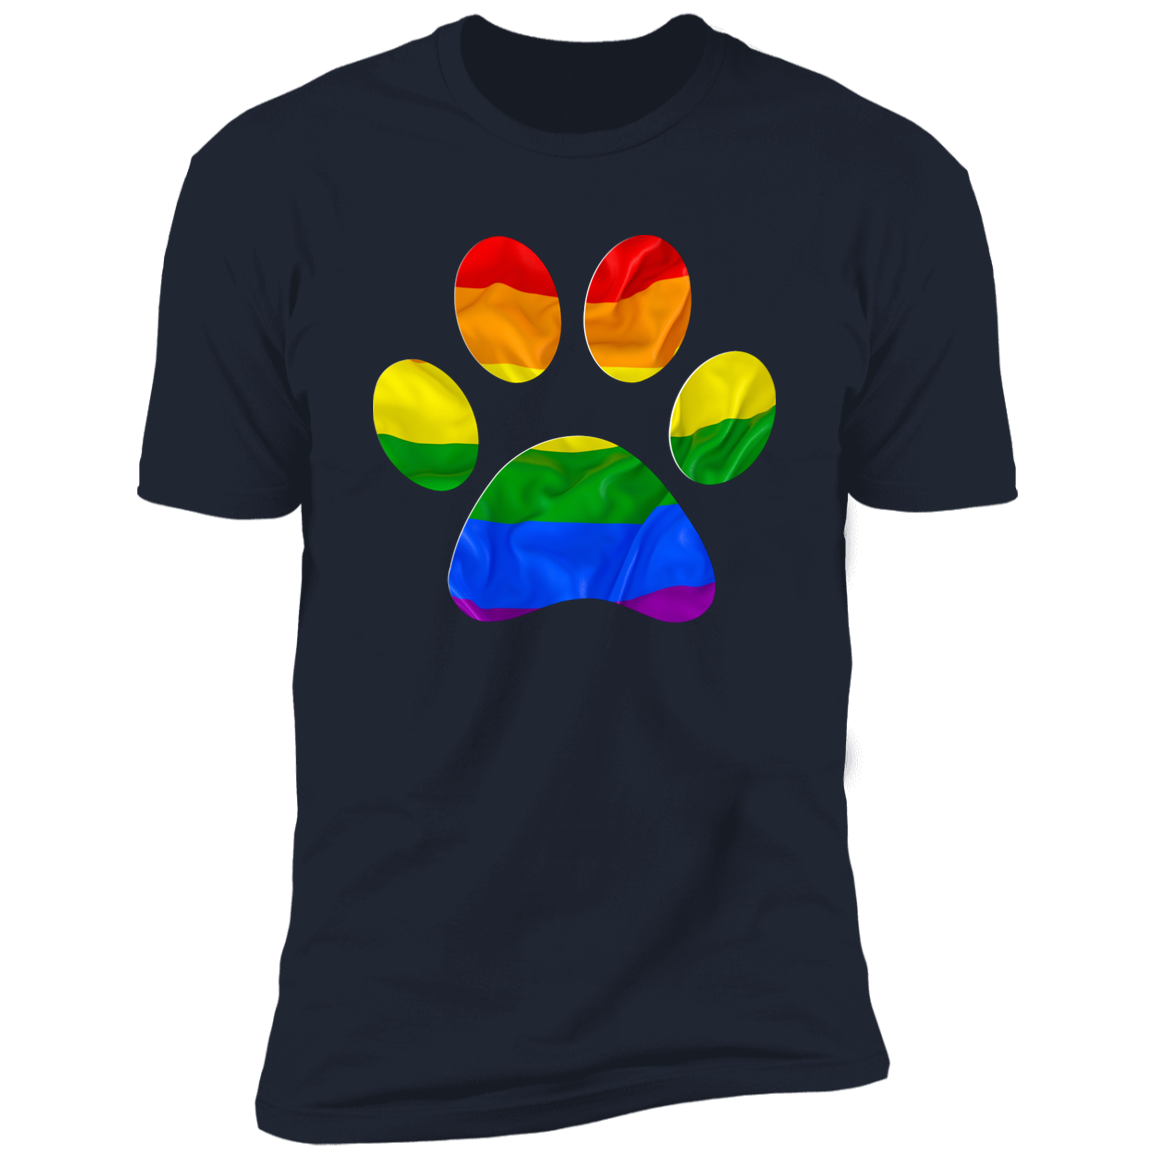 Pride Paw Pride T-shirt, Paw Pride Dog Shirt for humans, in navy blue